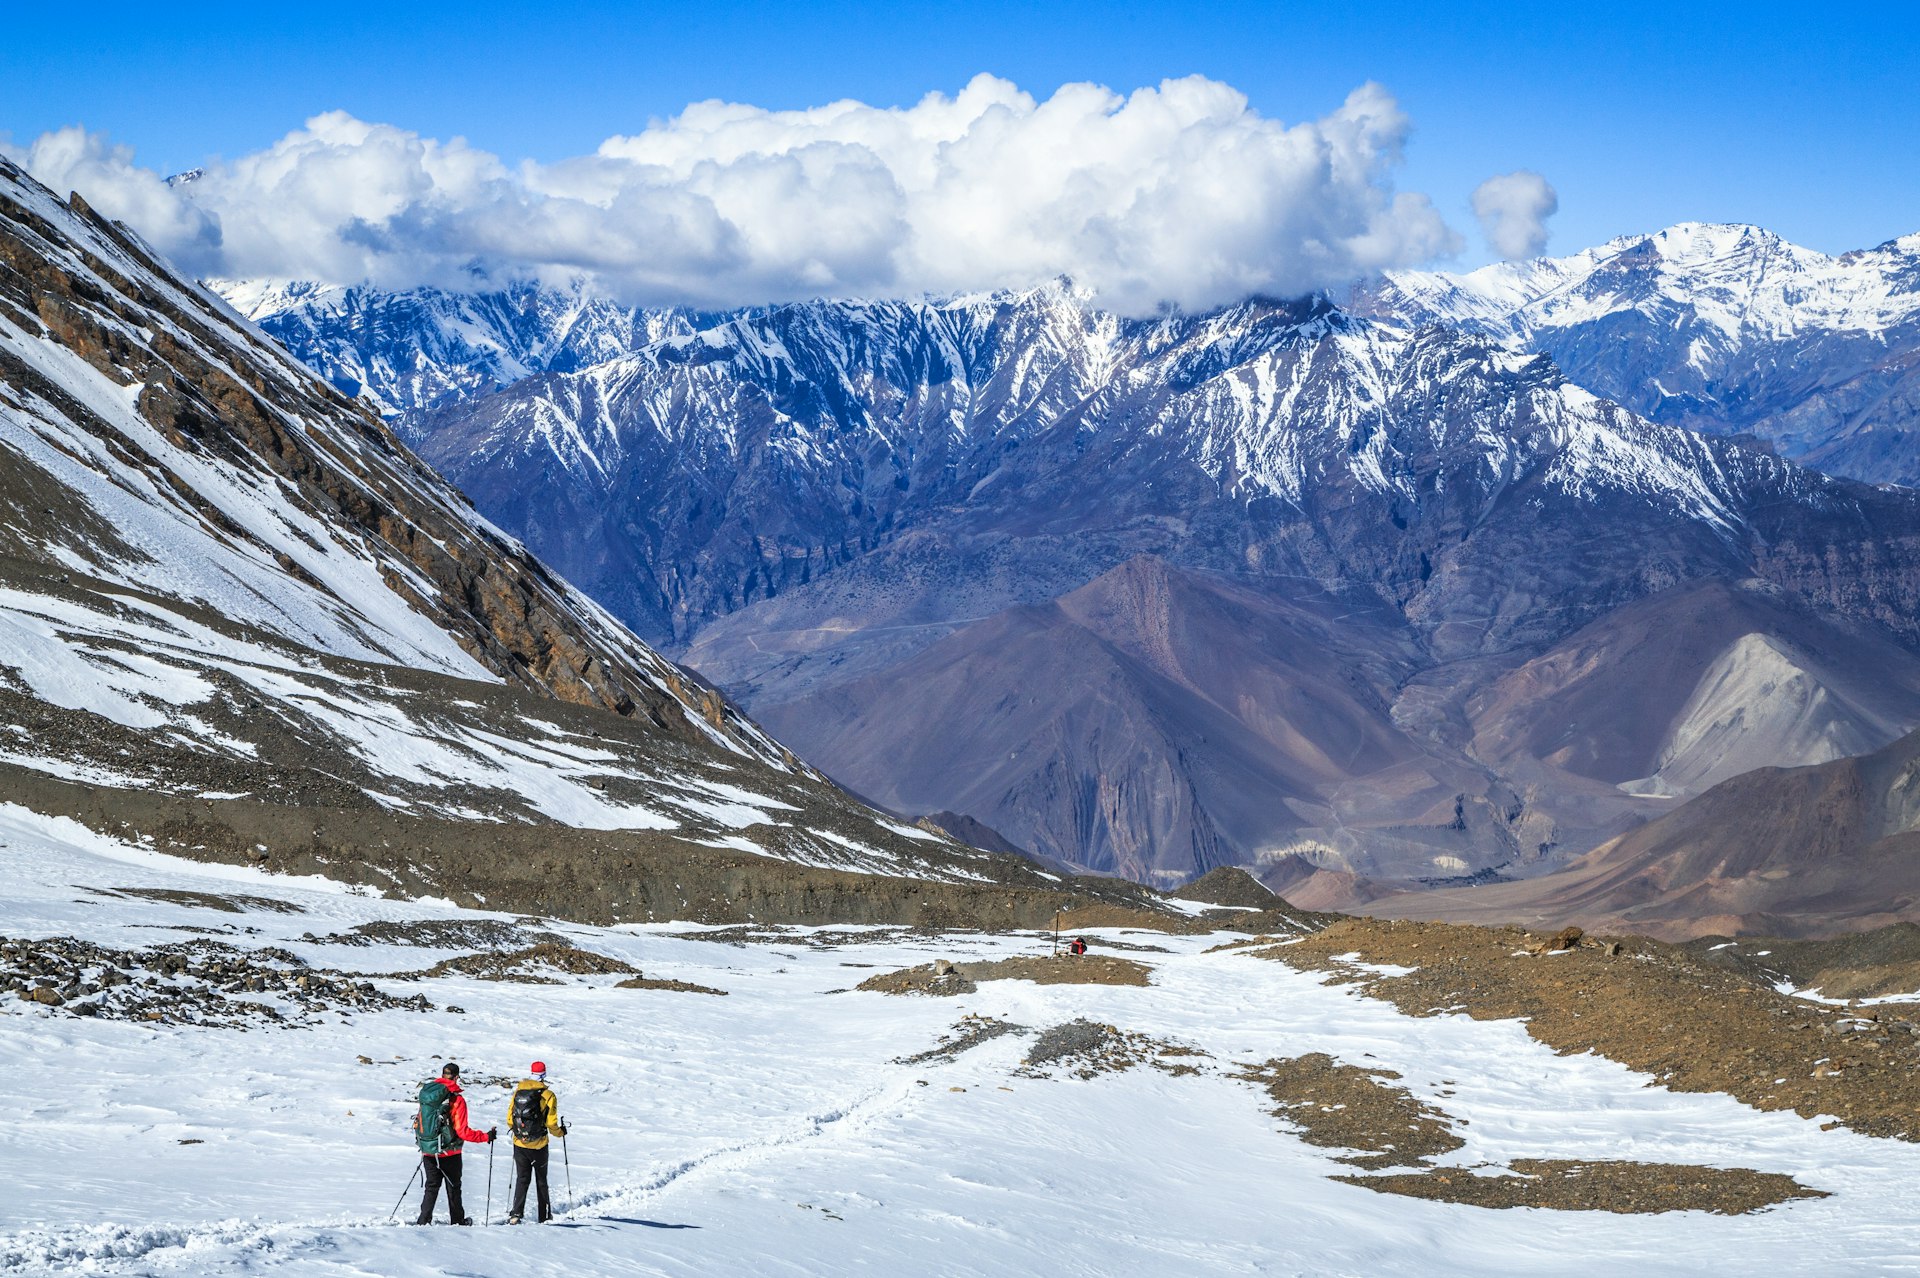 Two trekkers descend from the Thorung La pass on the Annapurna Circuit Trek 